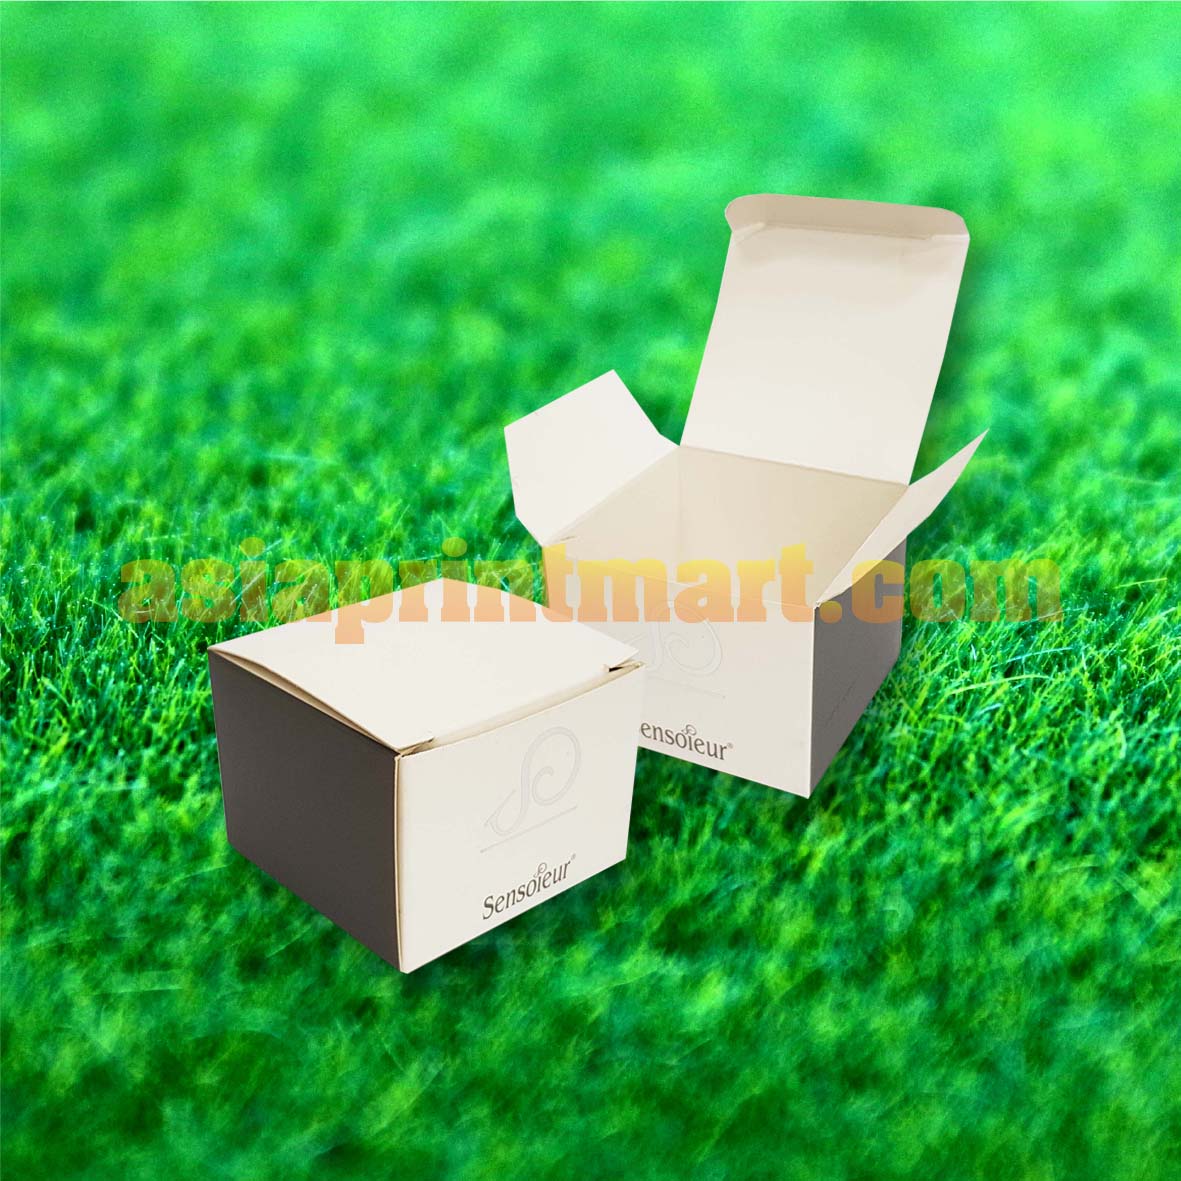 packaging supplier malaysia | packaging manufacturer malaysia | packaging printing malaysia